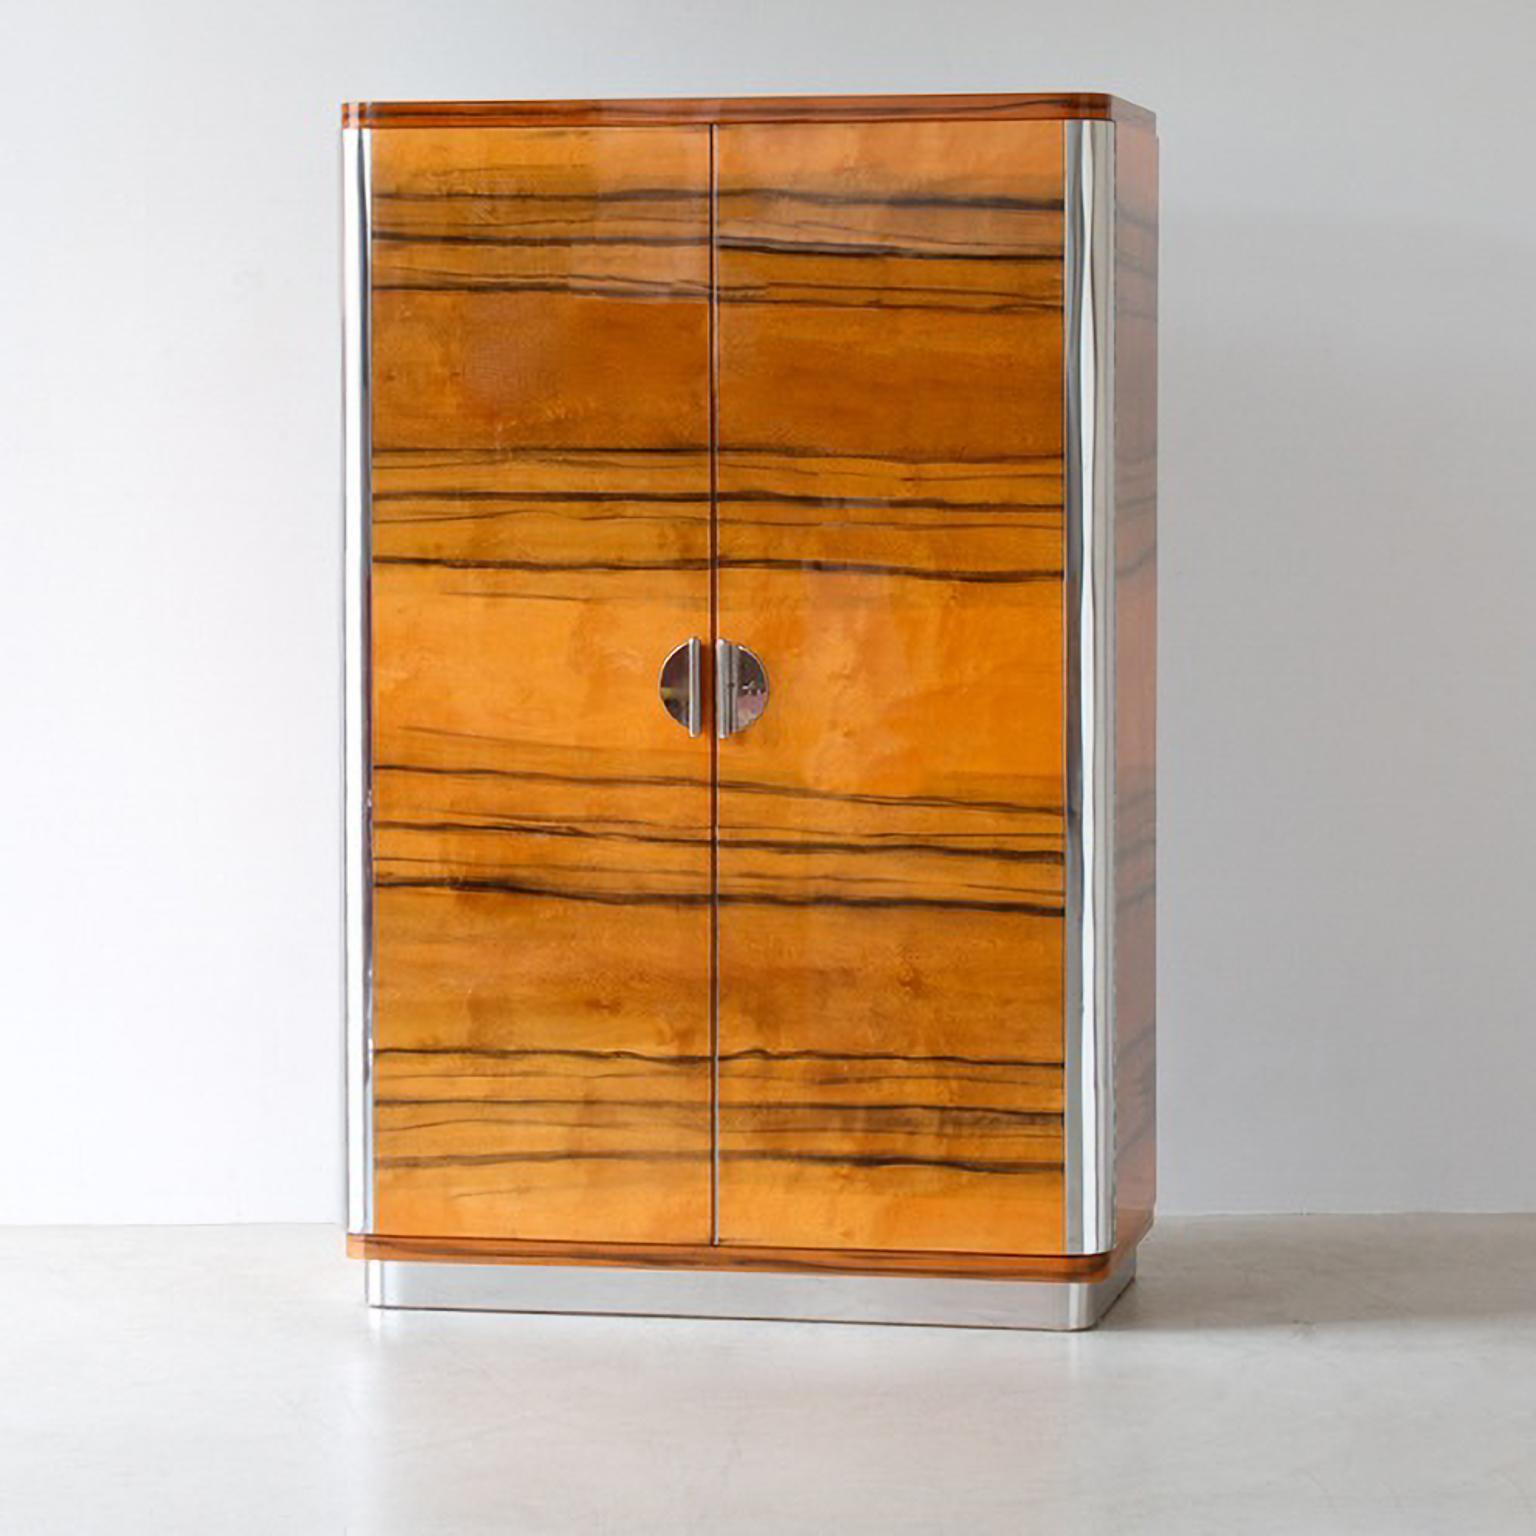 Custom made three-door wardrobe / armoire, designed and manufactured by GMD Berlin, exclusively presented in our Rudolf Vichr Collection.

These high-quality, handmade furniture in a classic, timeless design is made from selected materials according